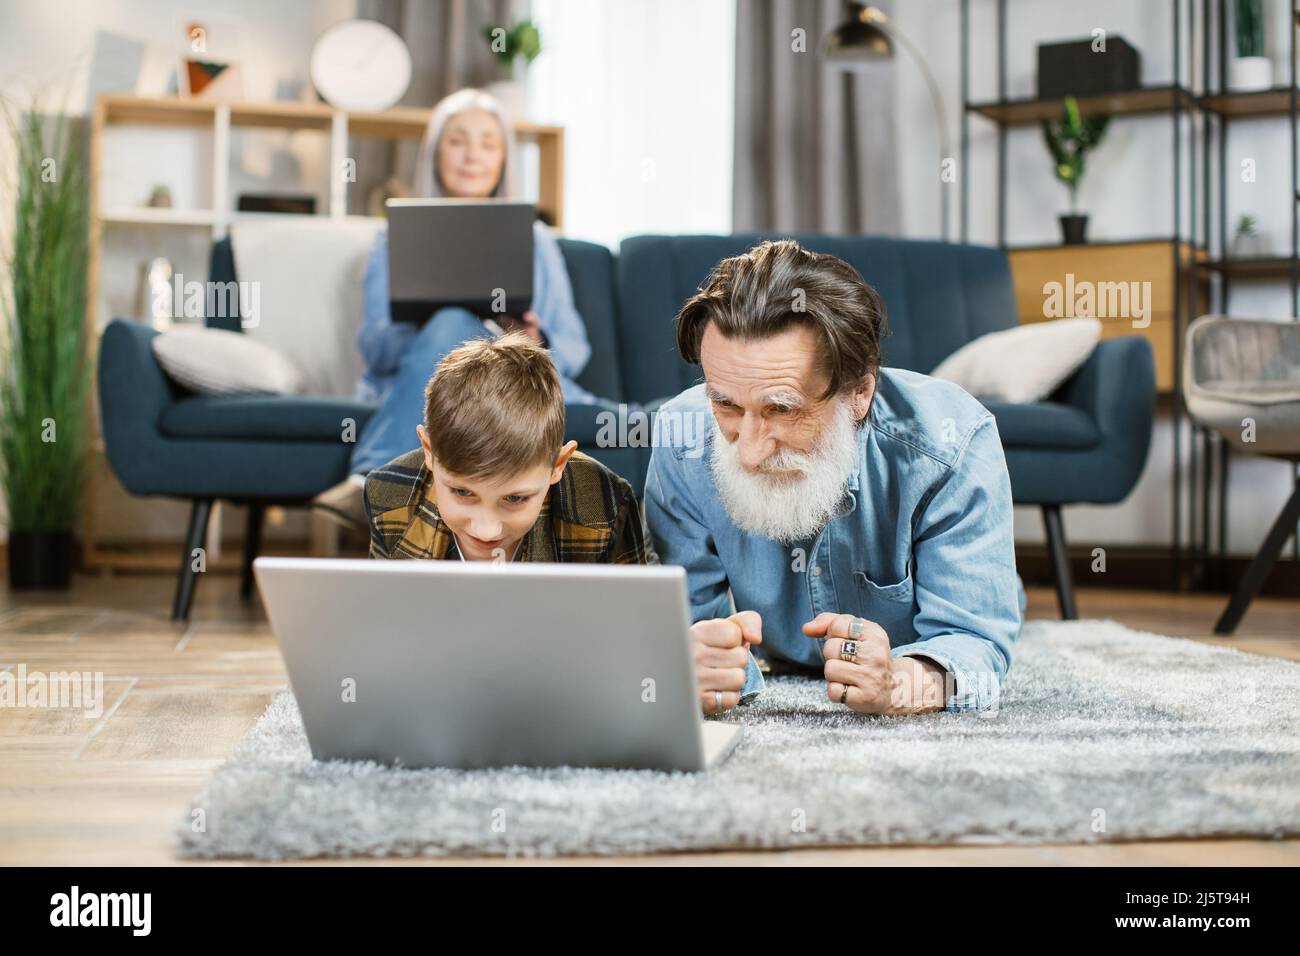 Happy different ages family leisure at home concept, mature grandmother relaxing using laptop on sofa in comfort living room while her grandchild playing on laptop with grandpa on warm floor. Stock Photo